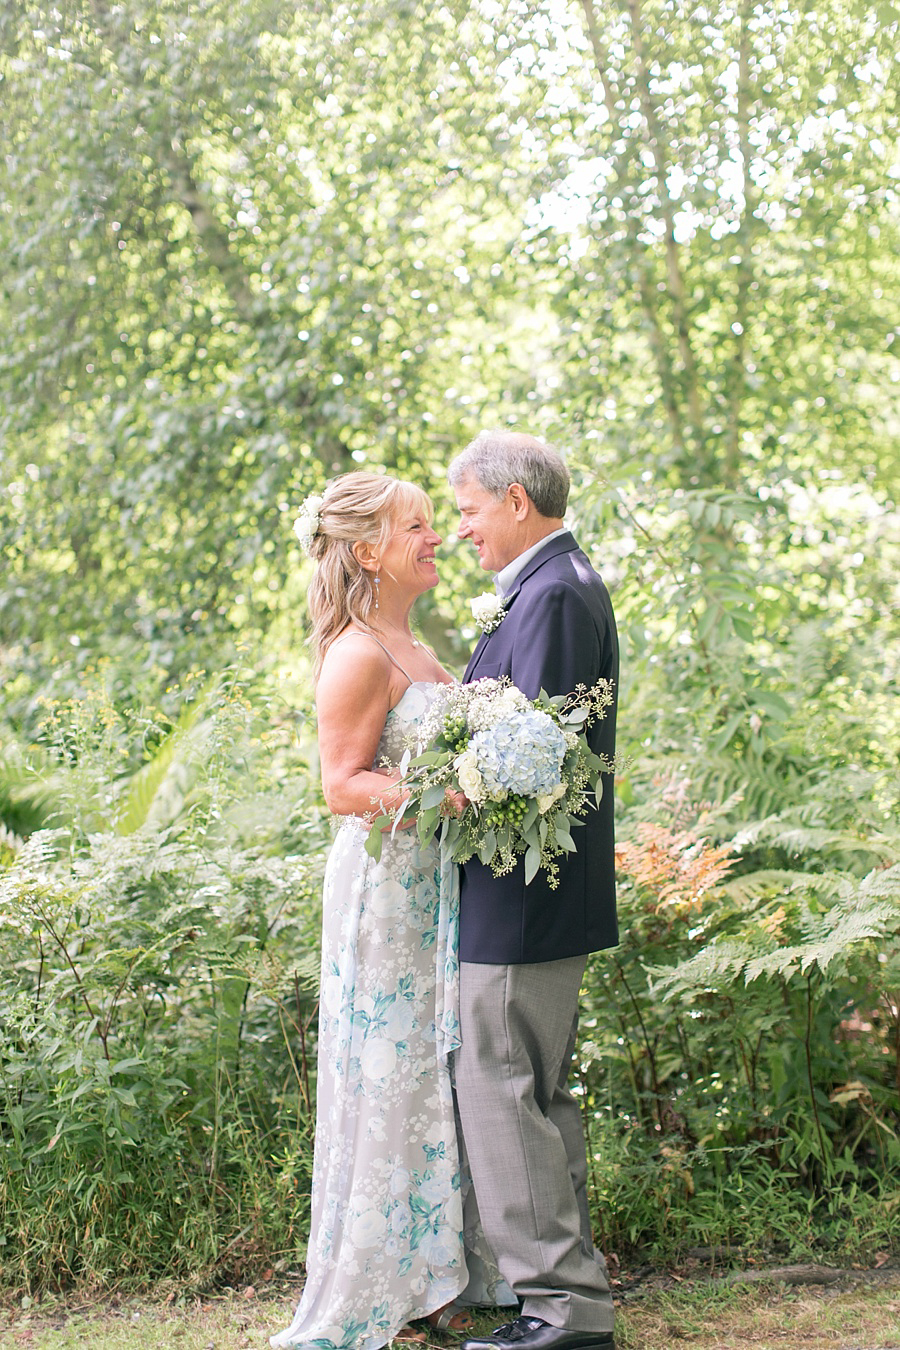 Private Estate Wedding Photographer- Amy Rizzuto Photography-34